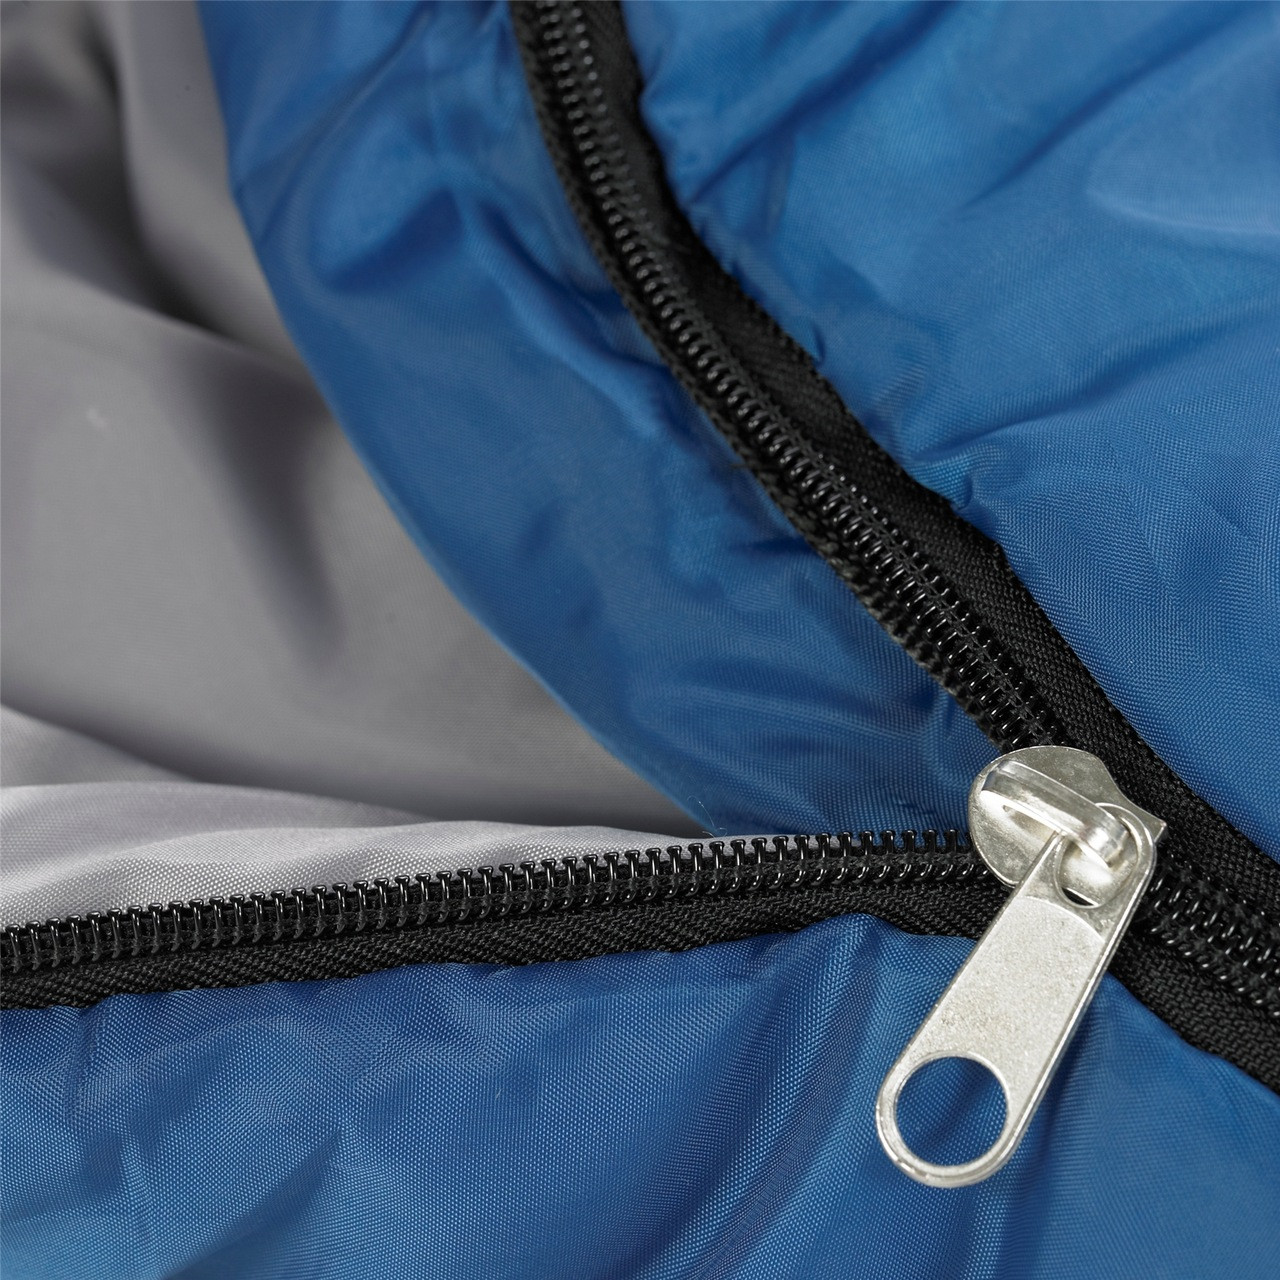 Close up view of the main zipper partially unzipped on the Wenzel Santa Fe Mummy 20 degree sleeping bag